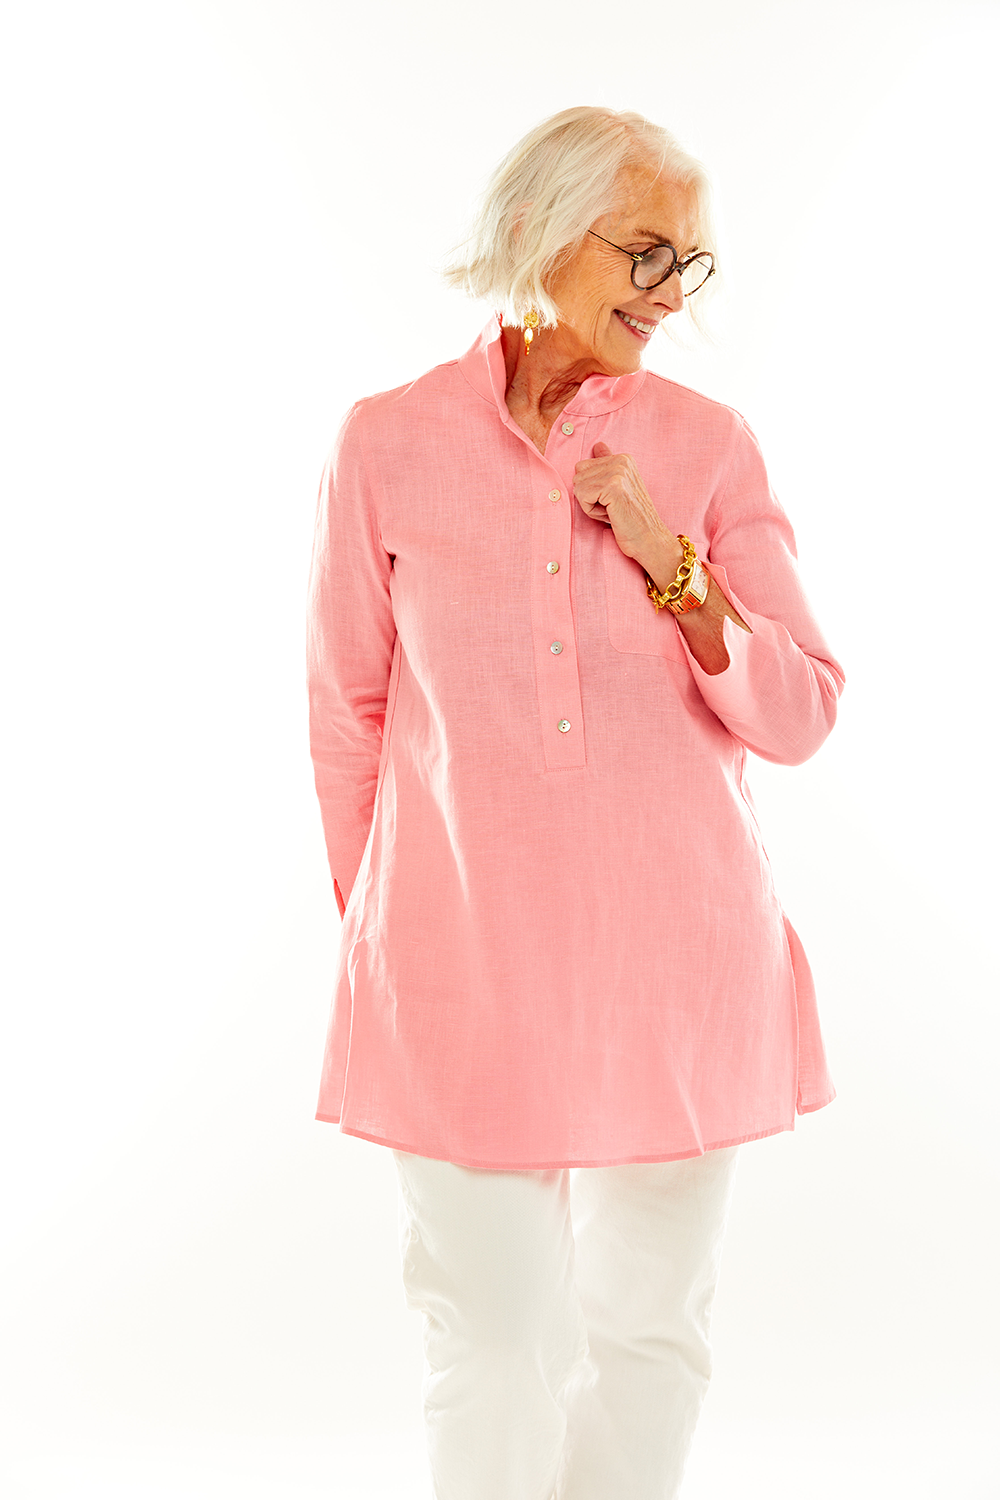 Woman in cotton candy tunic